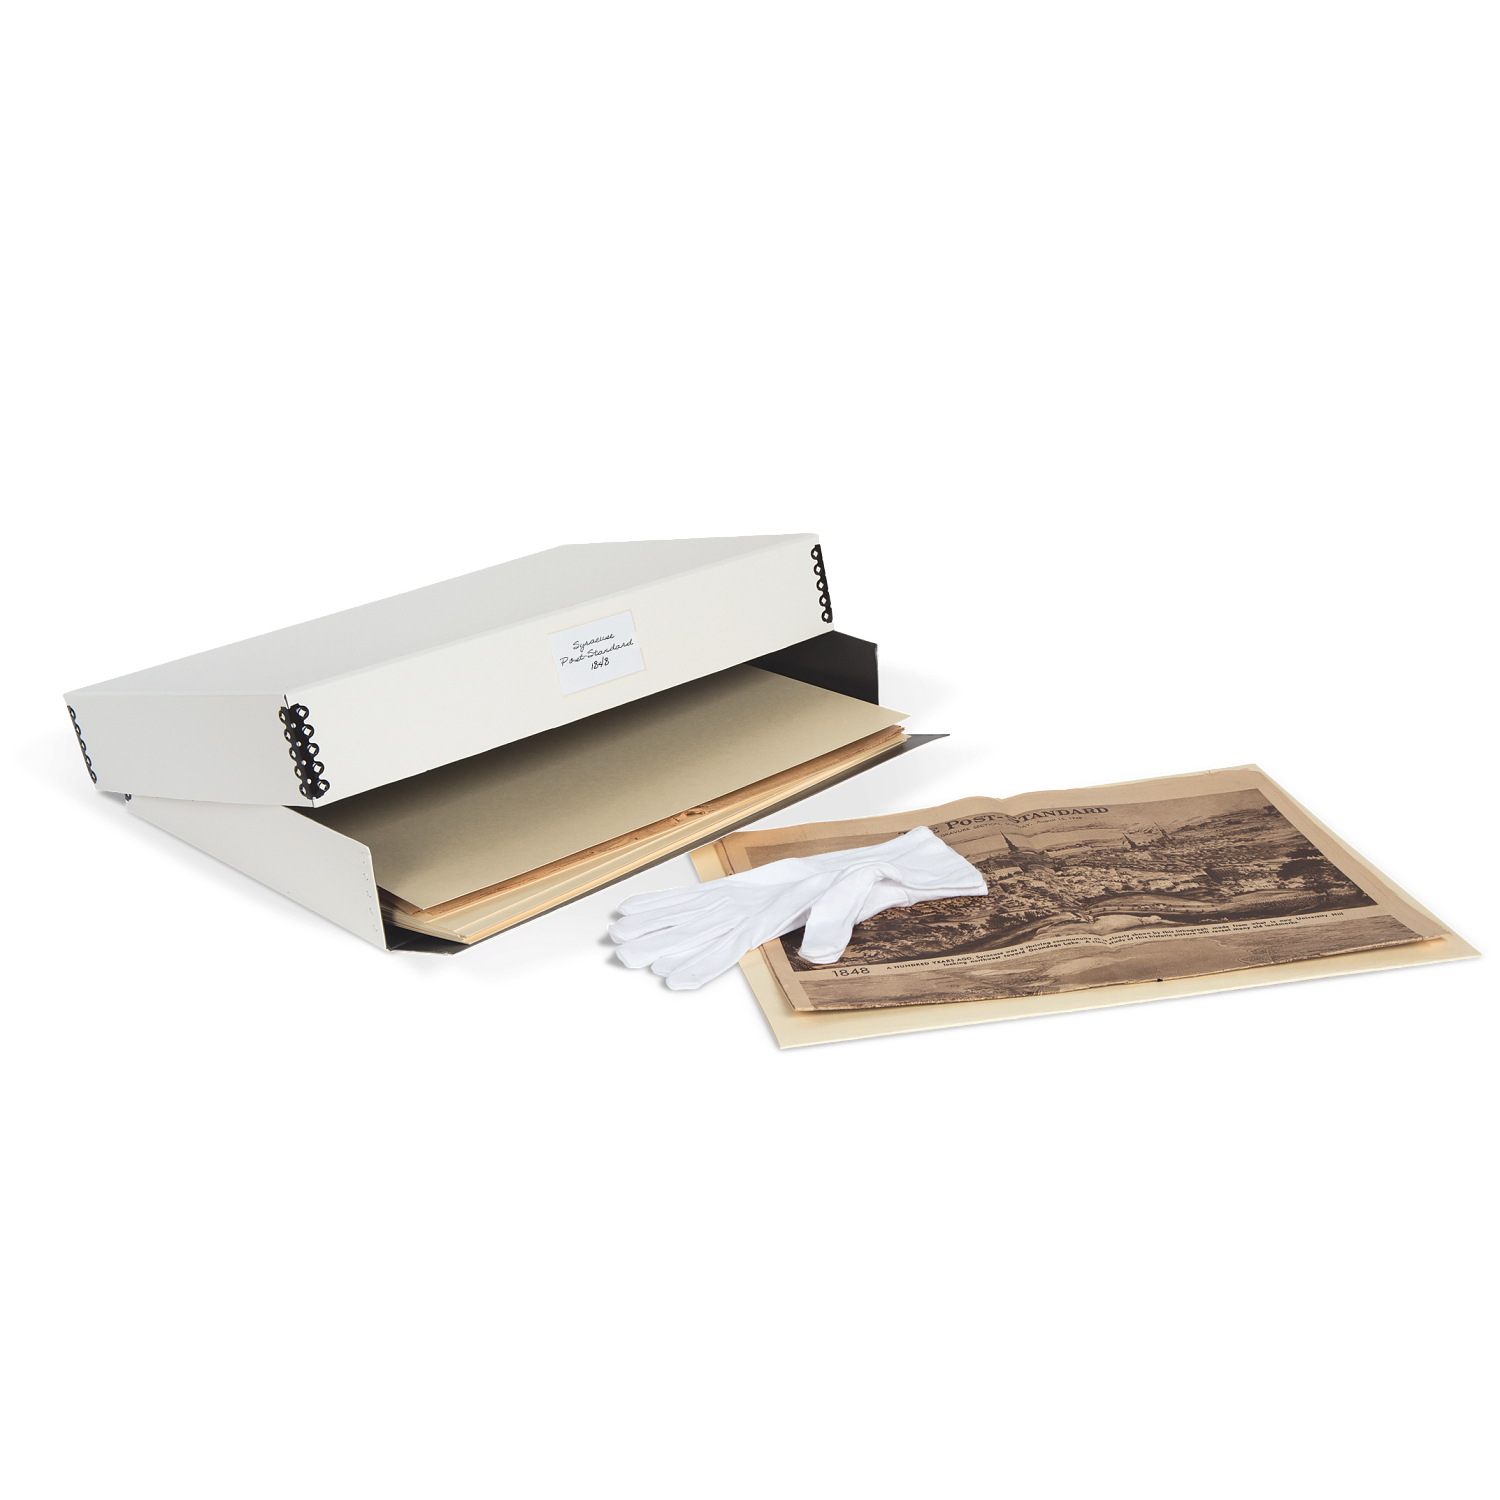 Gaylord Archival® 4 mil Archival Polyester LP Record Sleeves (10-Pack), Archival Envelopes, Sleeves & Protectors, Preservation